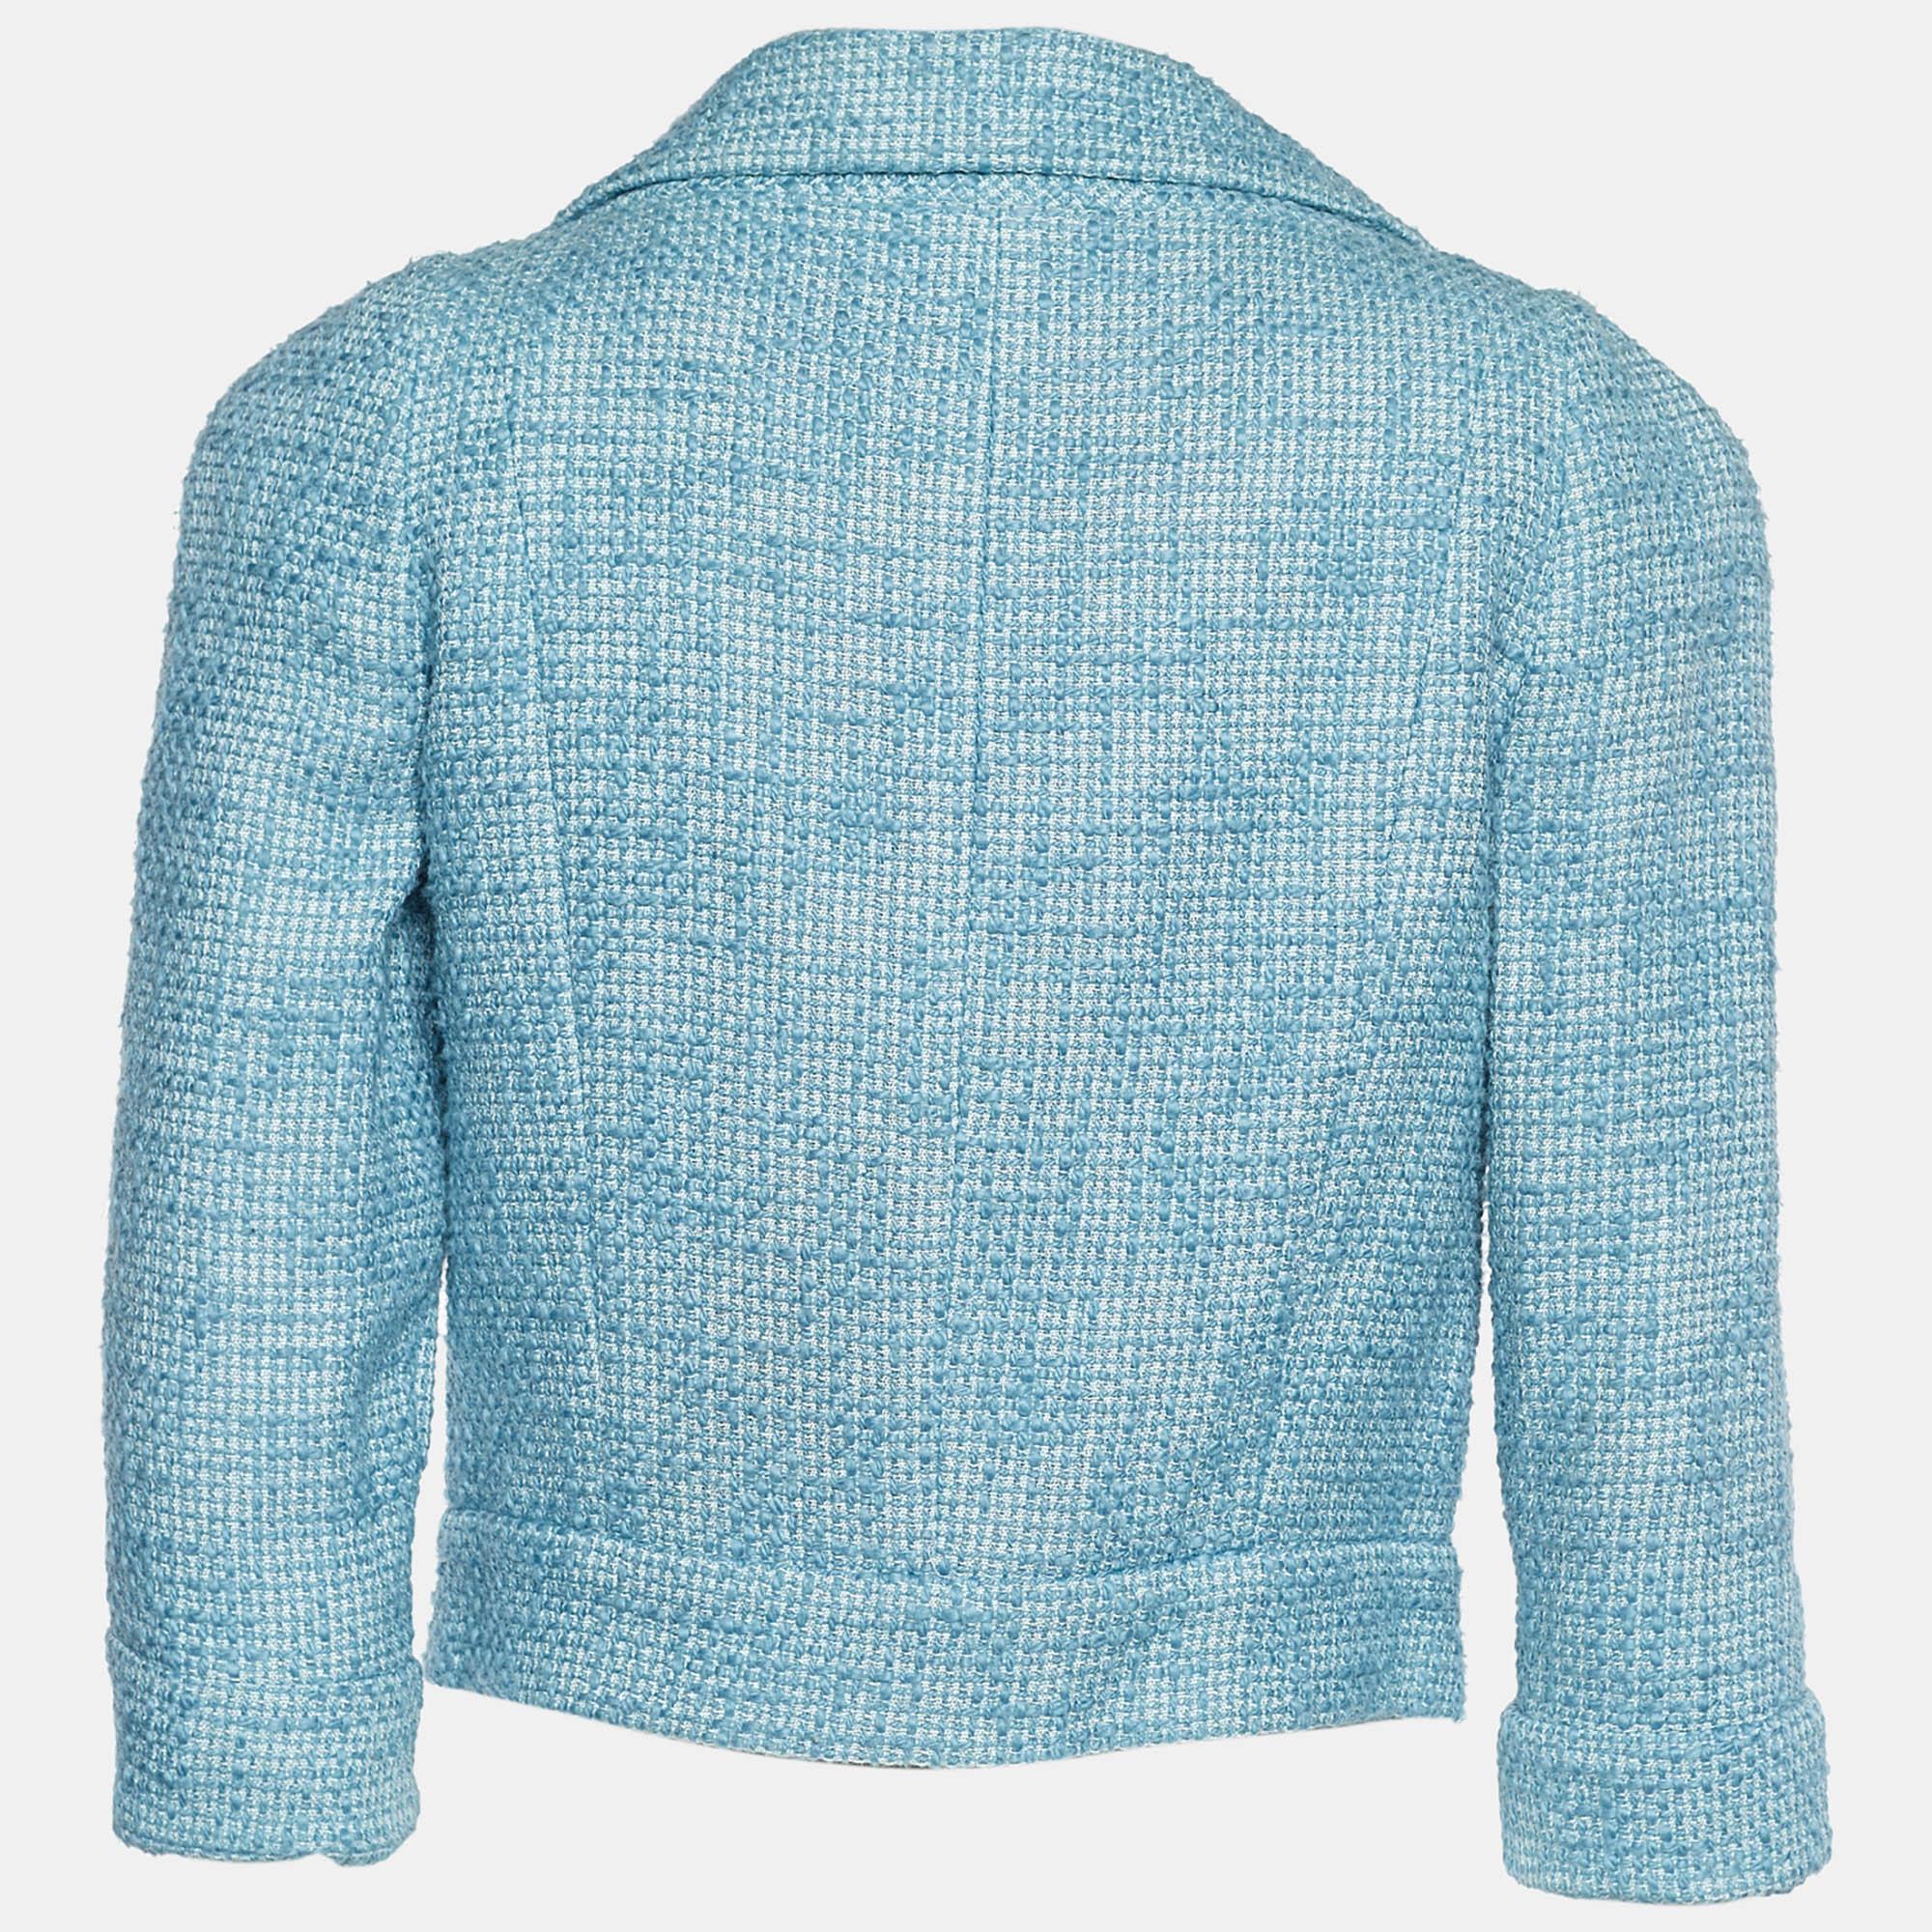 Experience the charming vibe of celebrities and vintage art with this jacket from Chanel. Featuring a cropped silhouette, blue tweed fabric, and decorative button embellishments, this Chanel creation pays an ode to a never-aging style. It carries